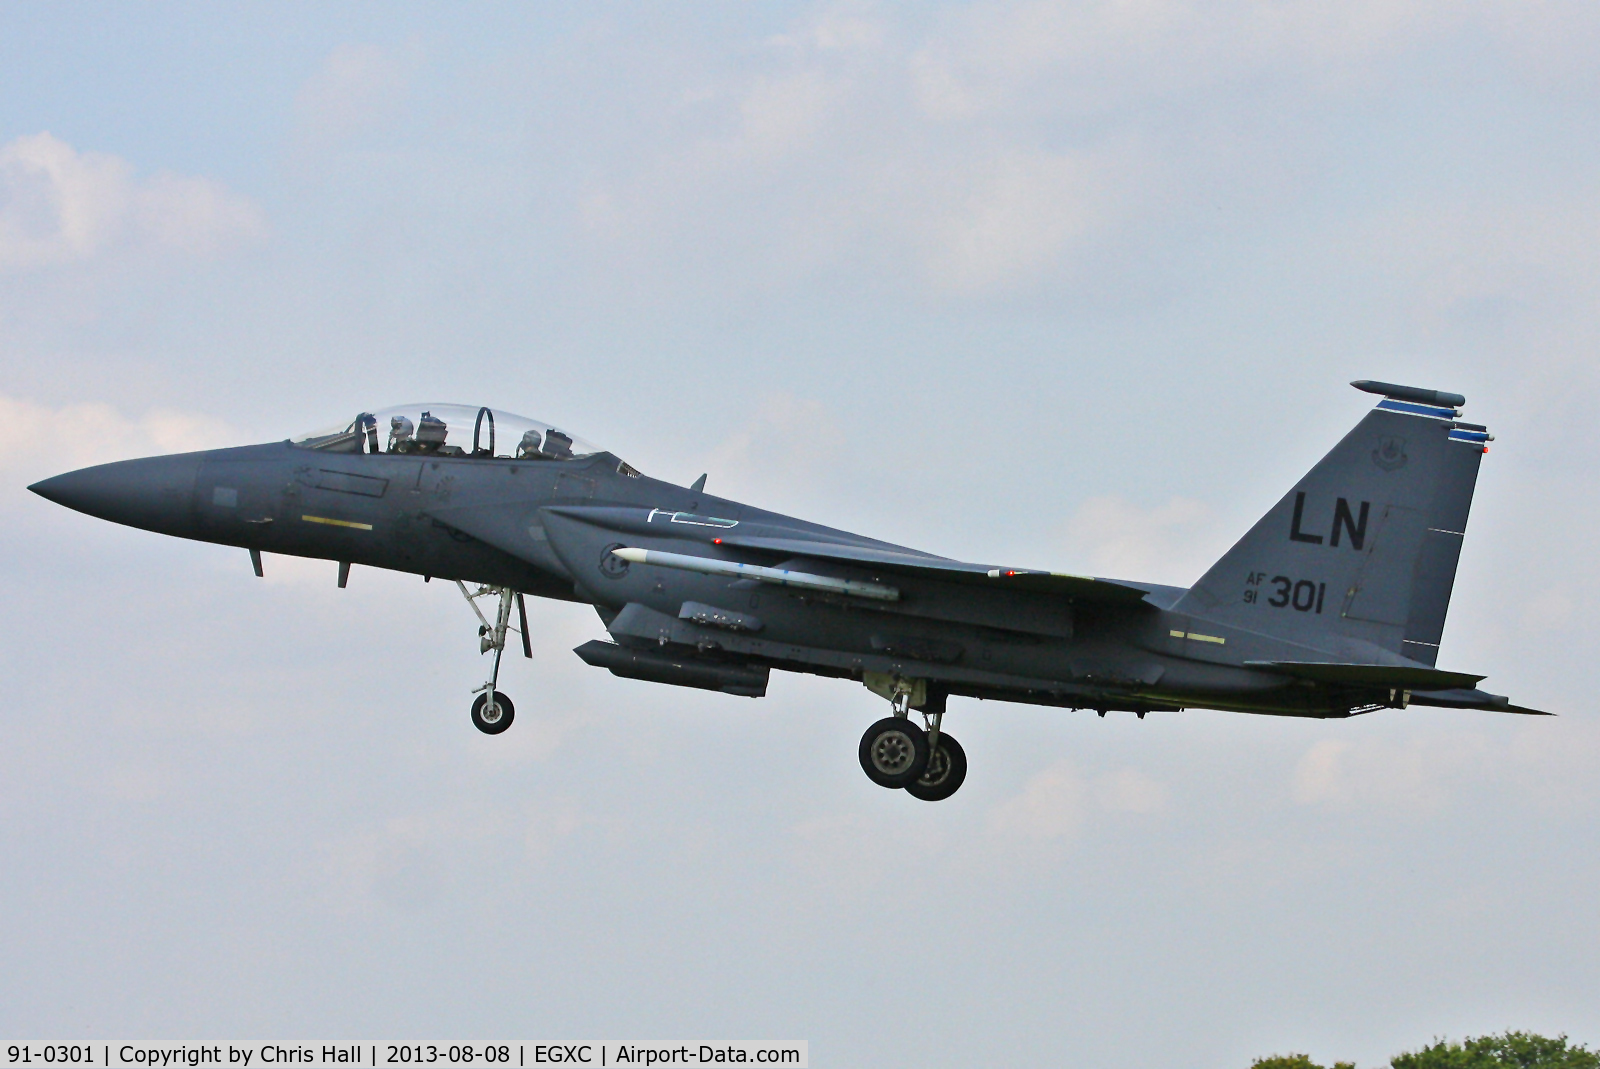 91-0301, 1991 McDonnell Douglas F-15E Strike Eagle C/N 1208/E166, 492nd Fighter Squadron “Madhatters”